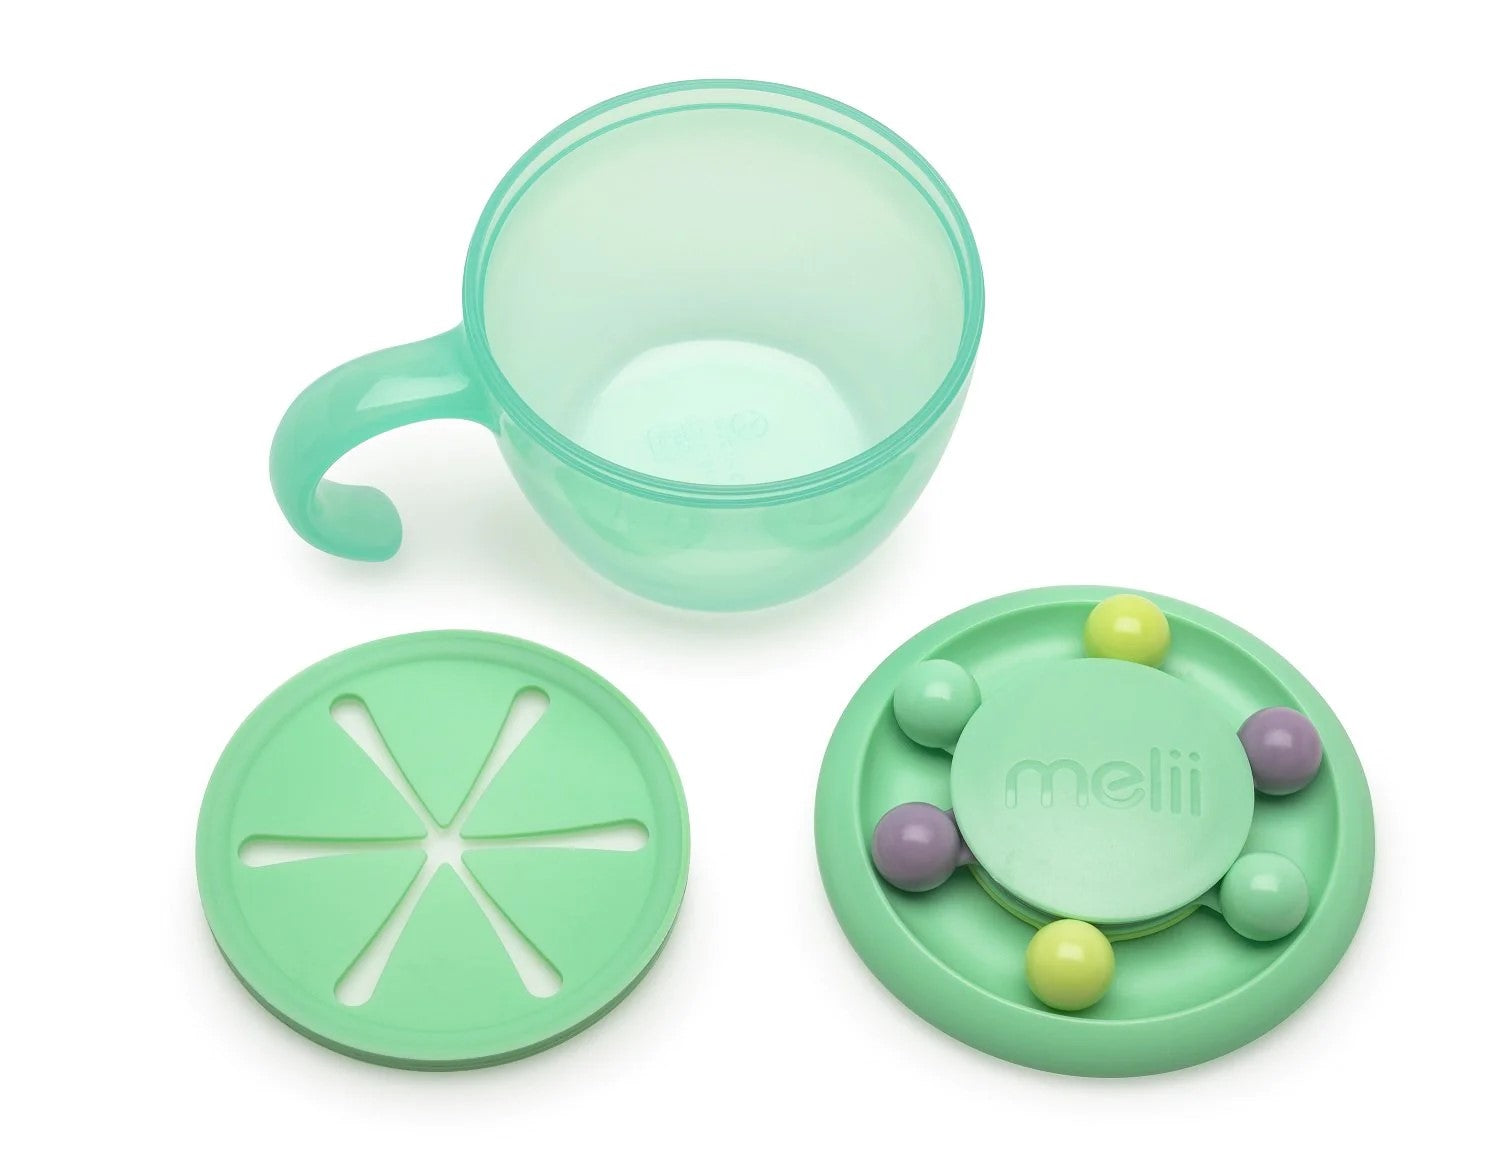 Melii  Snack Container Abacus- Mint